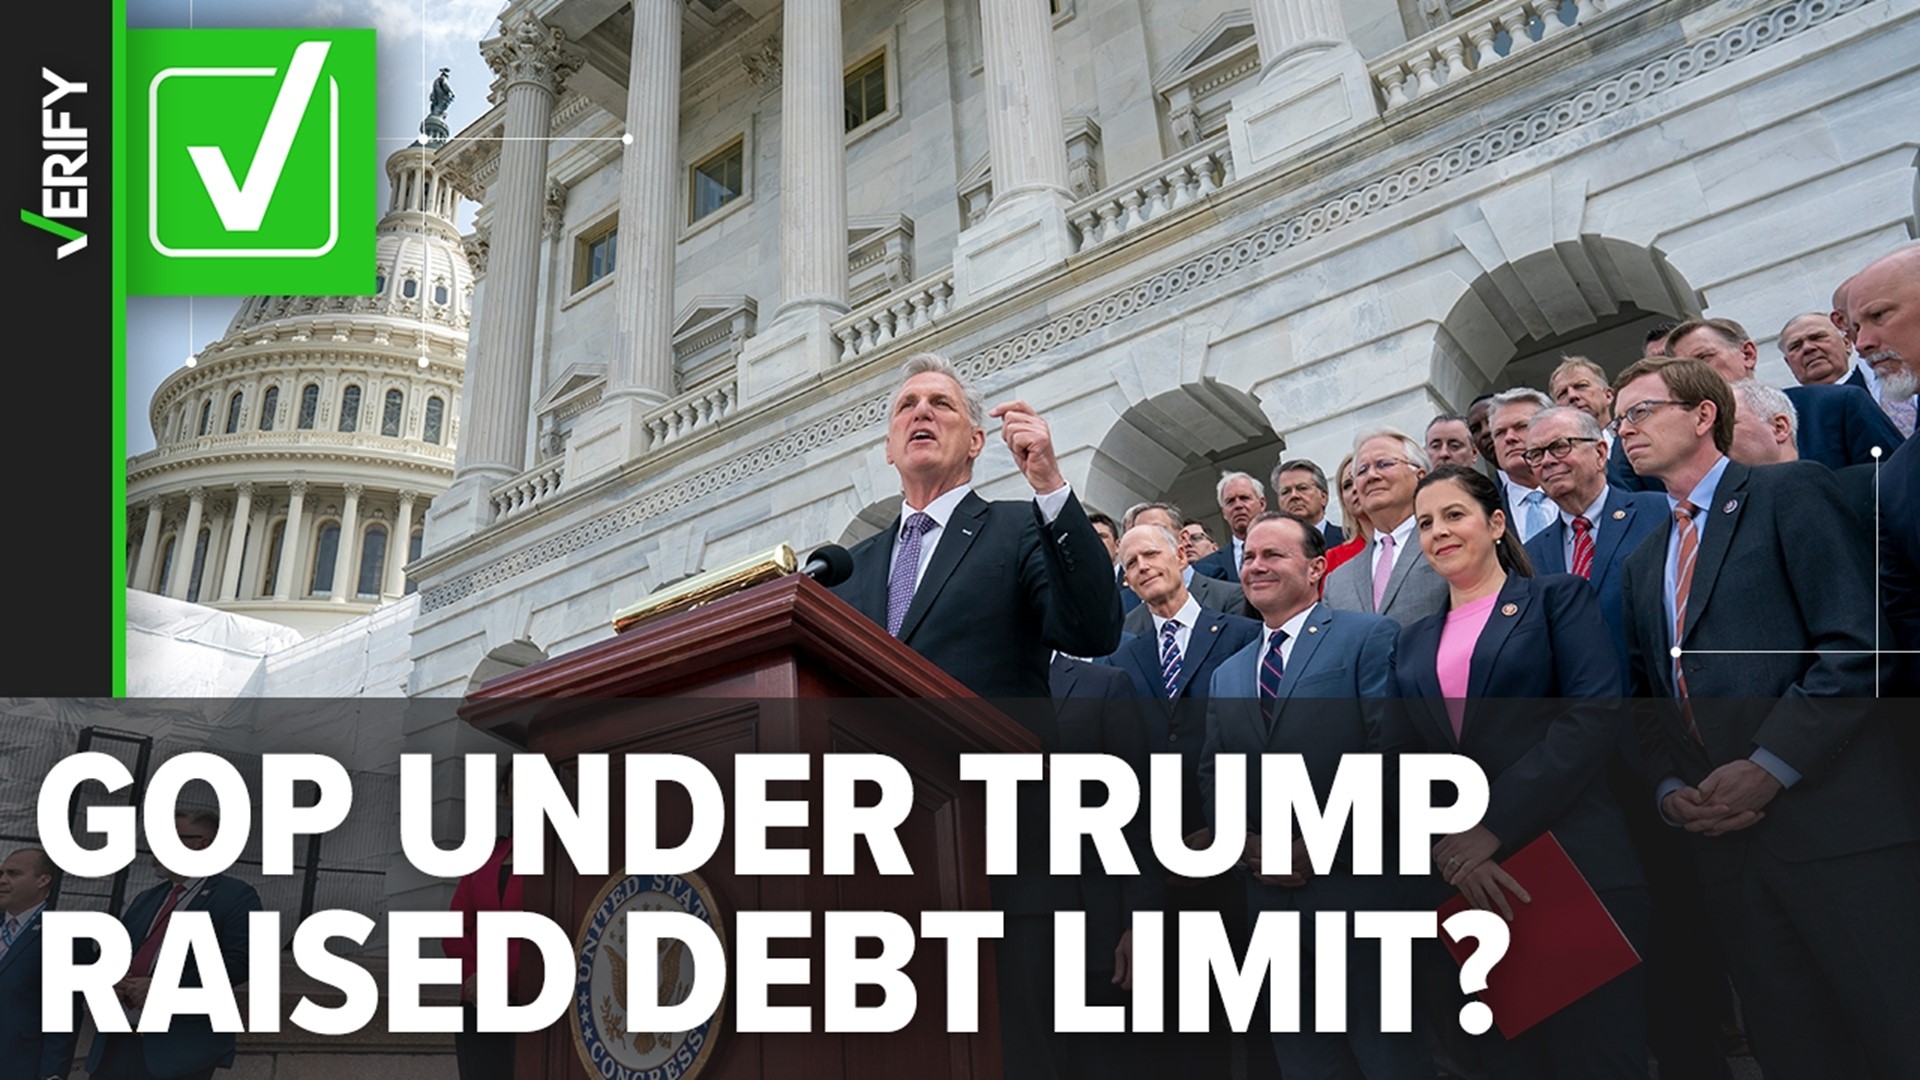 House Republicans say they won’t lift the debt ceiling unless President Biden agrees to cut spending. Viewers asked whether they had the same demands for Trump.